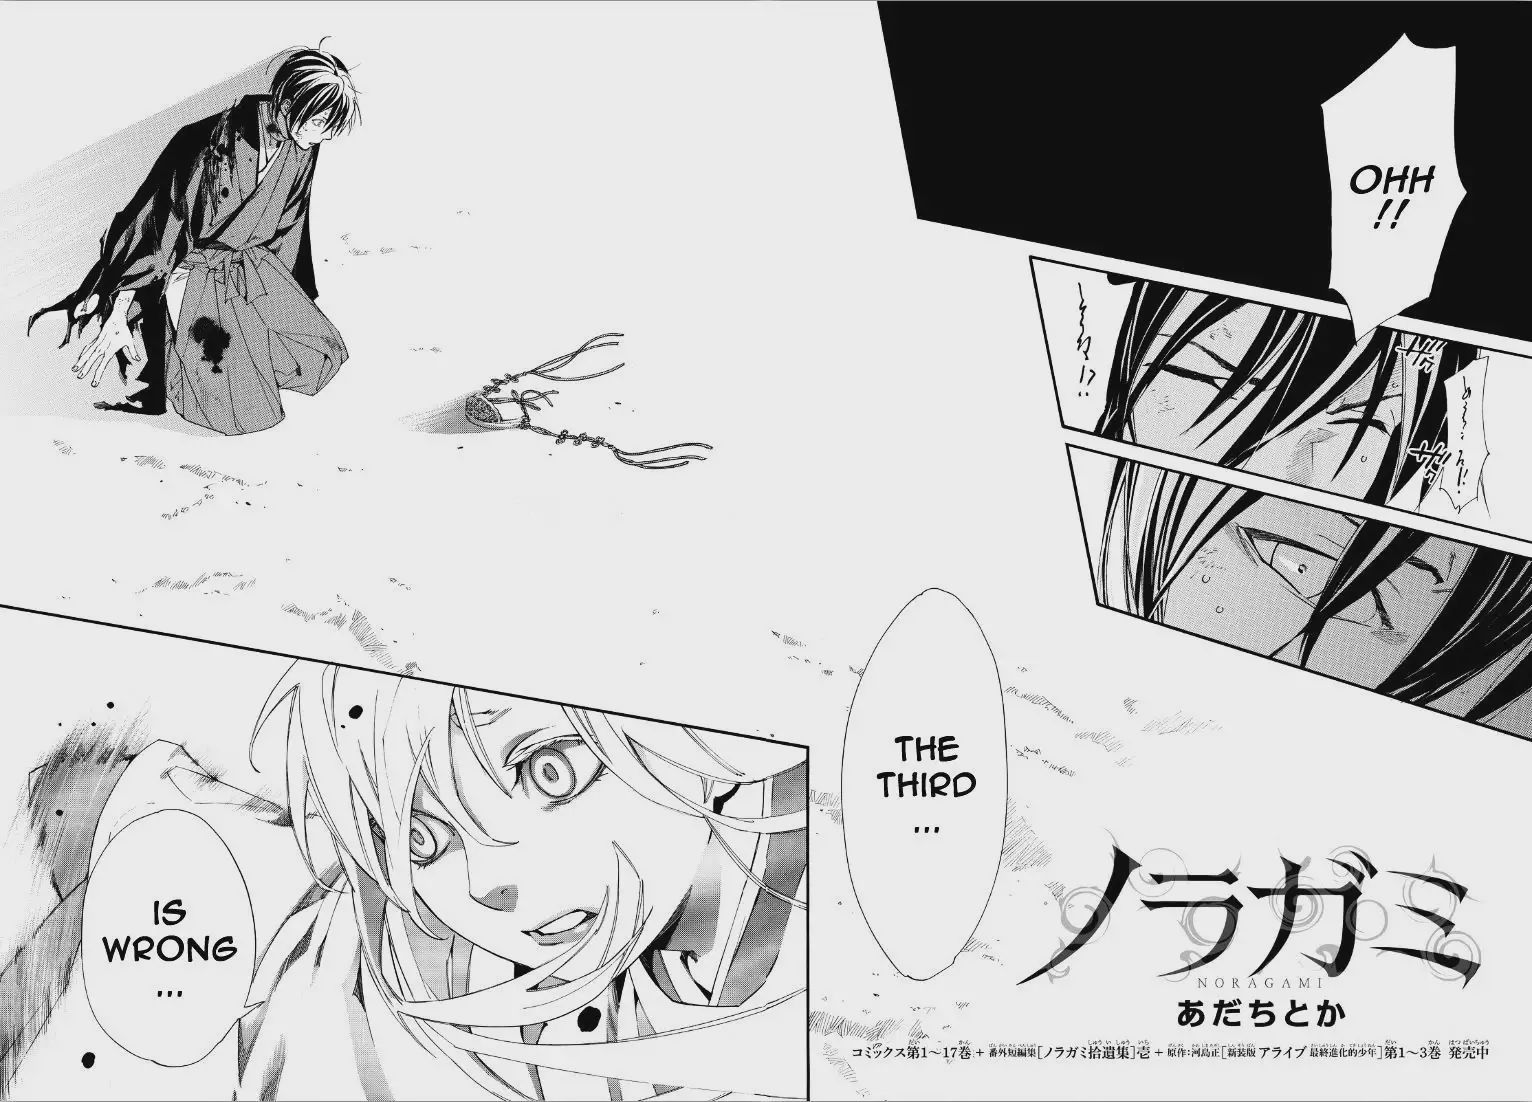 Noragami Chapter 72 Negation